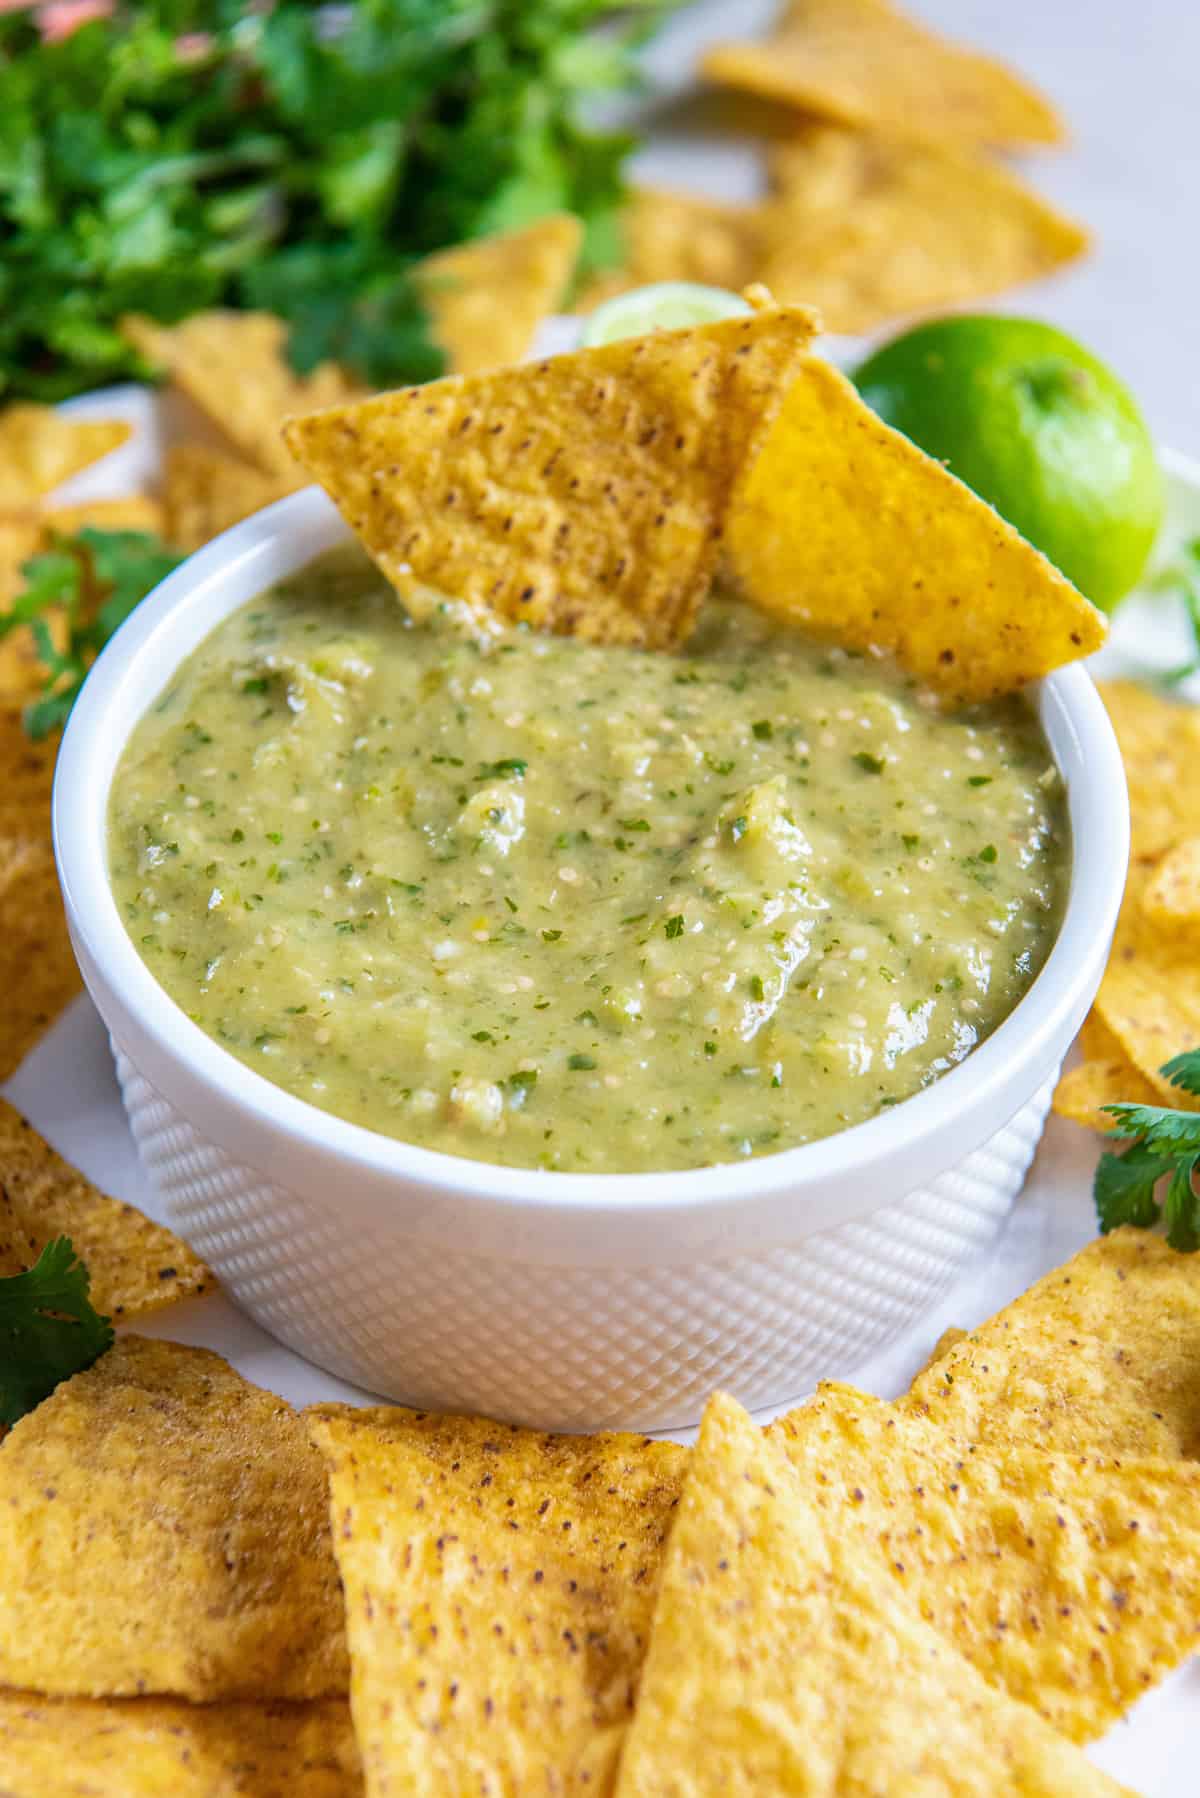 Two tortilla chips resting in a small bowl of tomatillo green salsa.